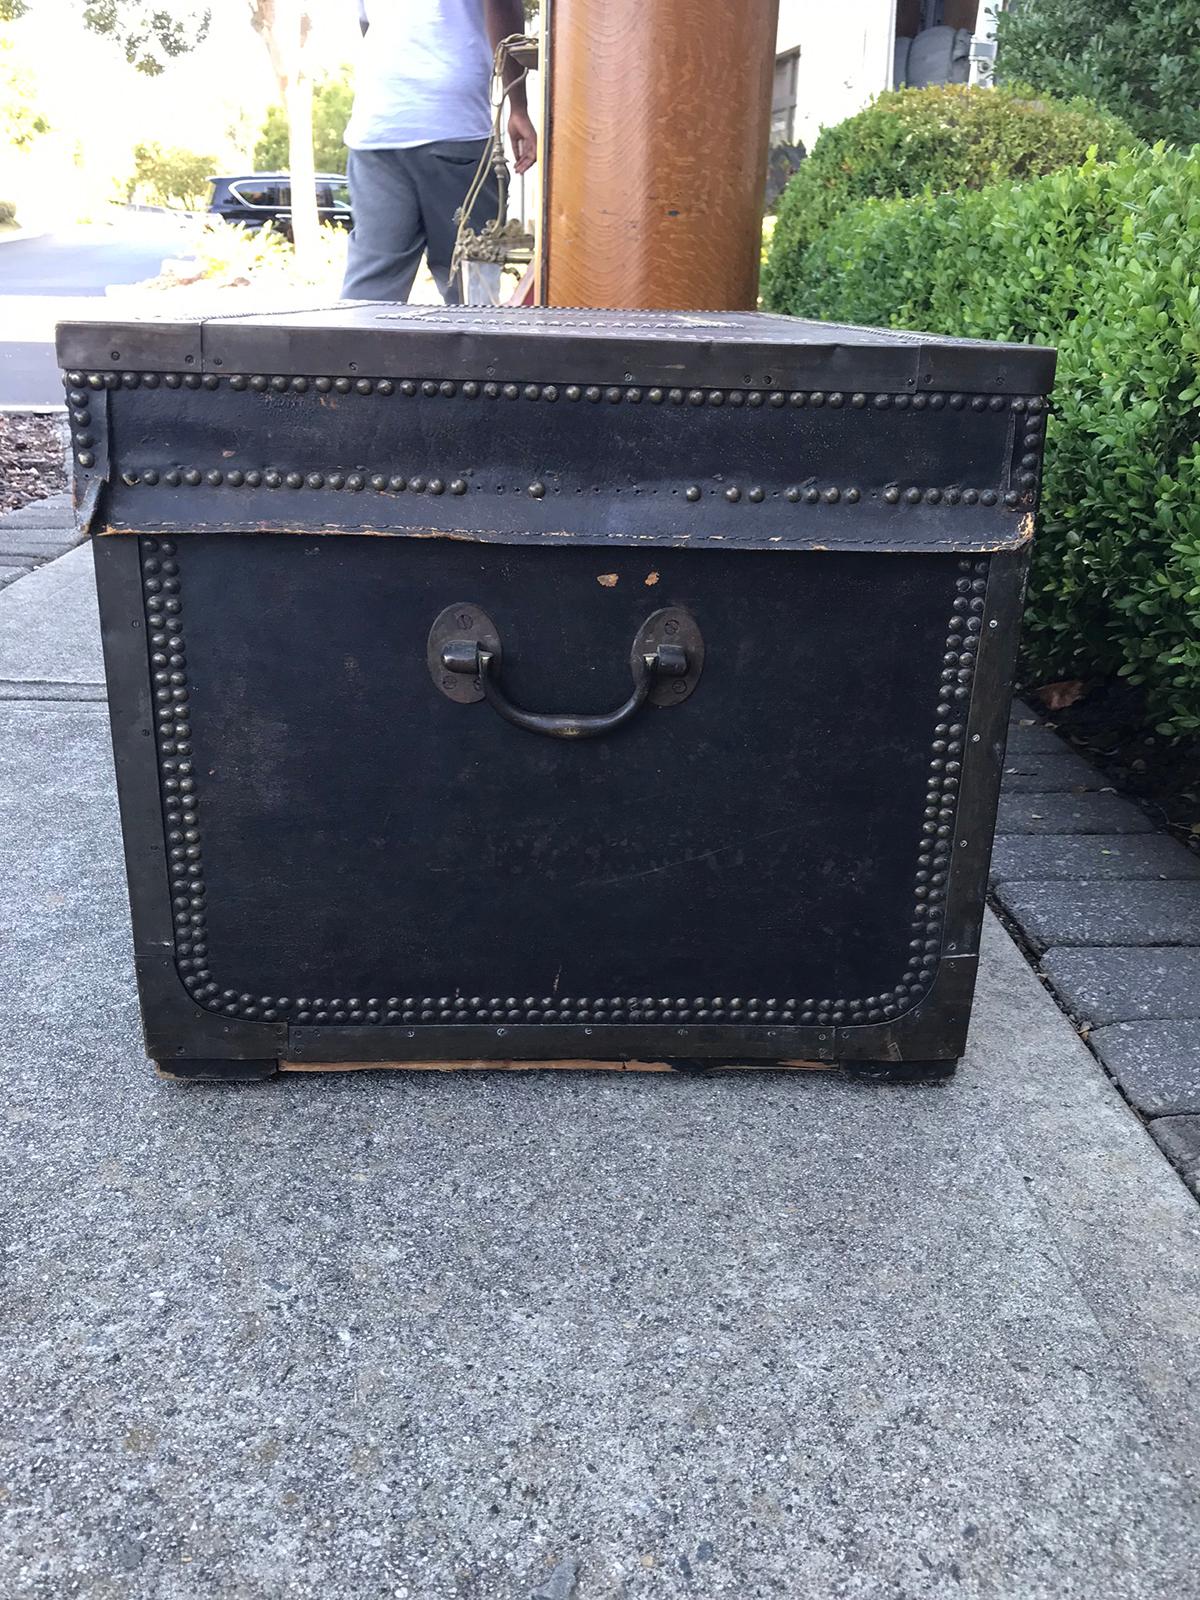 Early 19th Century English Regency Camphor Wood and Black Leather Covered Trunk, circa 1810s-1820s For Sale